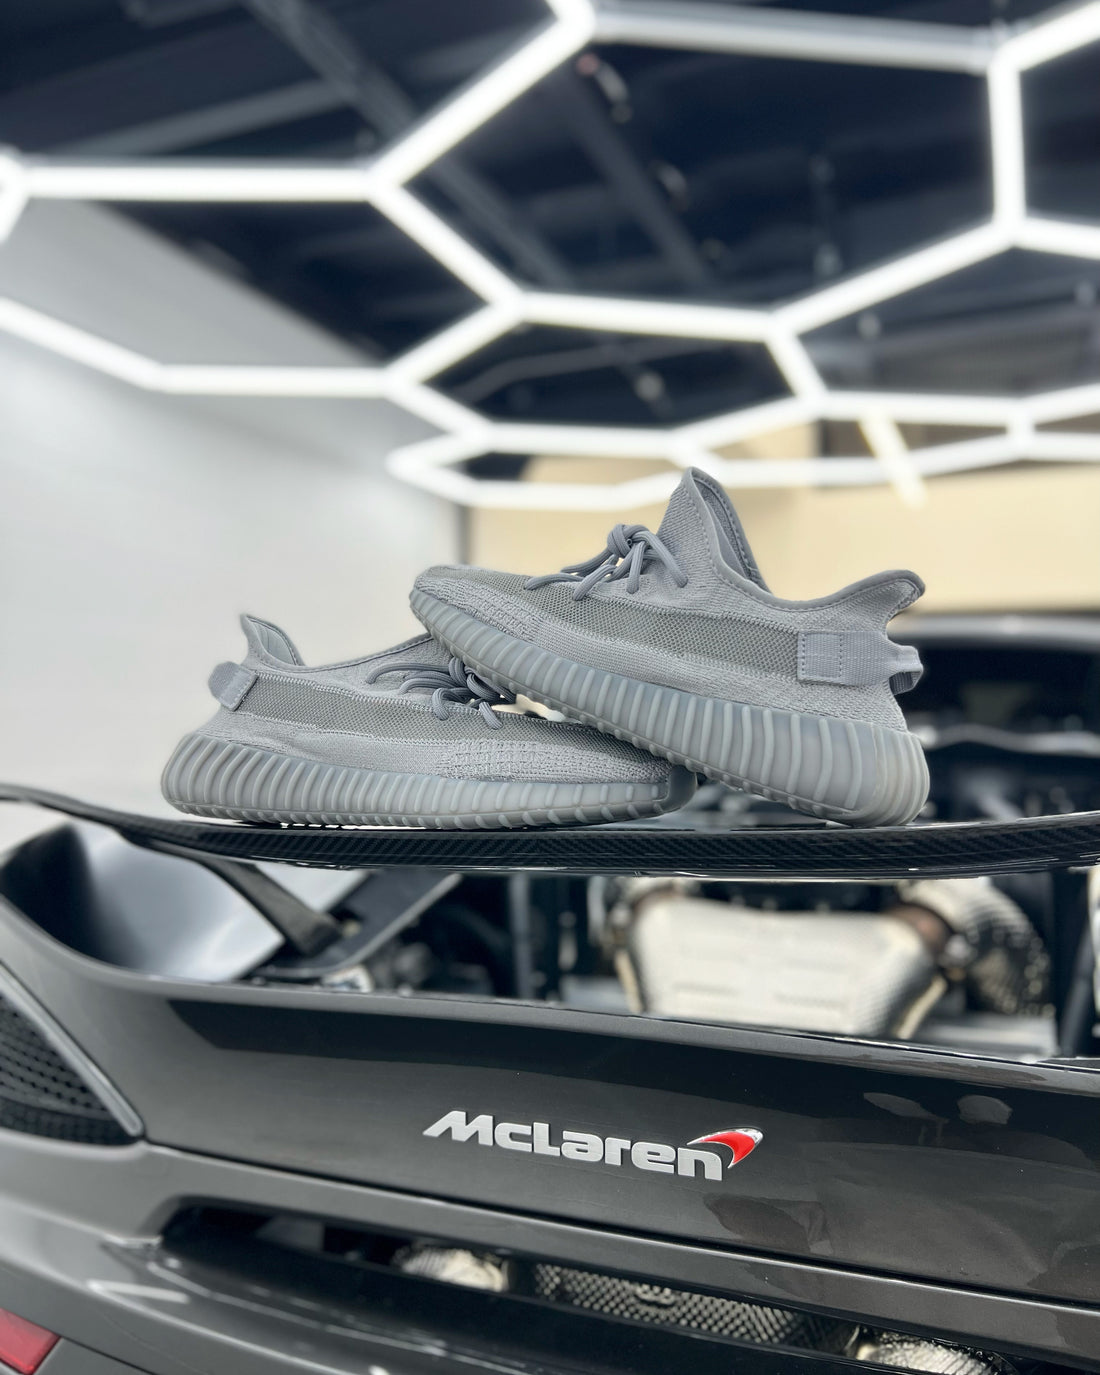 Let's talk iconic styles: Yeezy 350V2 Boost by Adidas x Kanye West ...